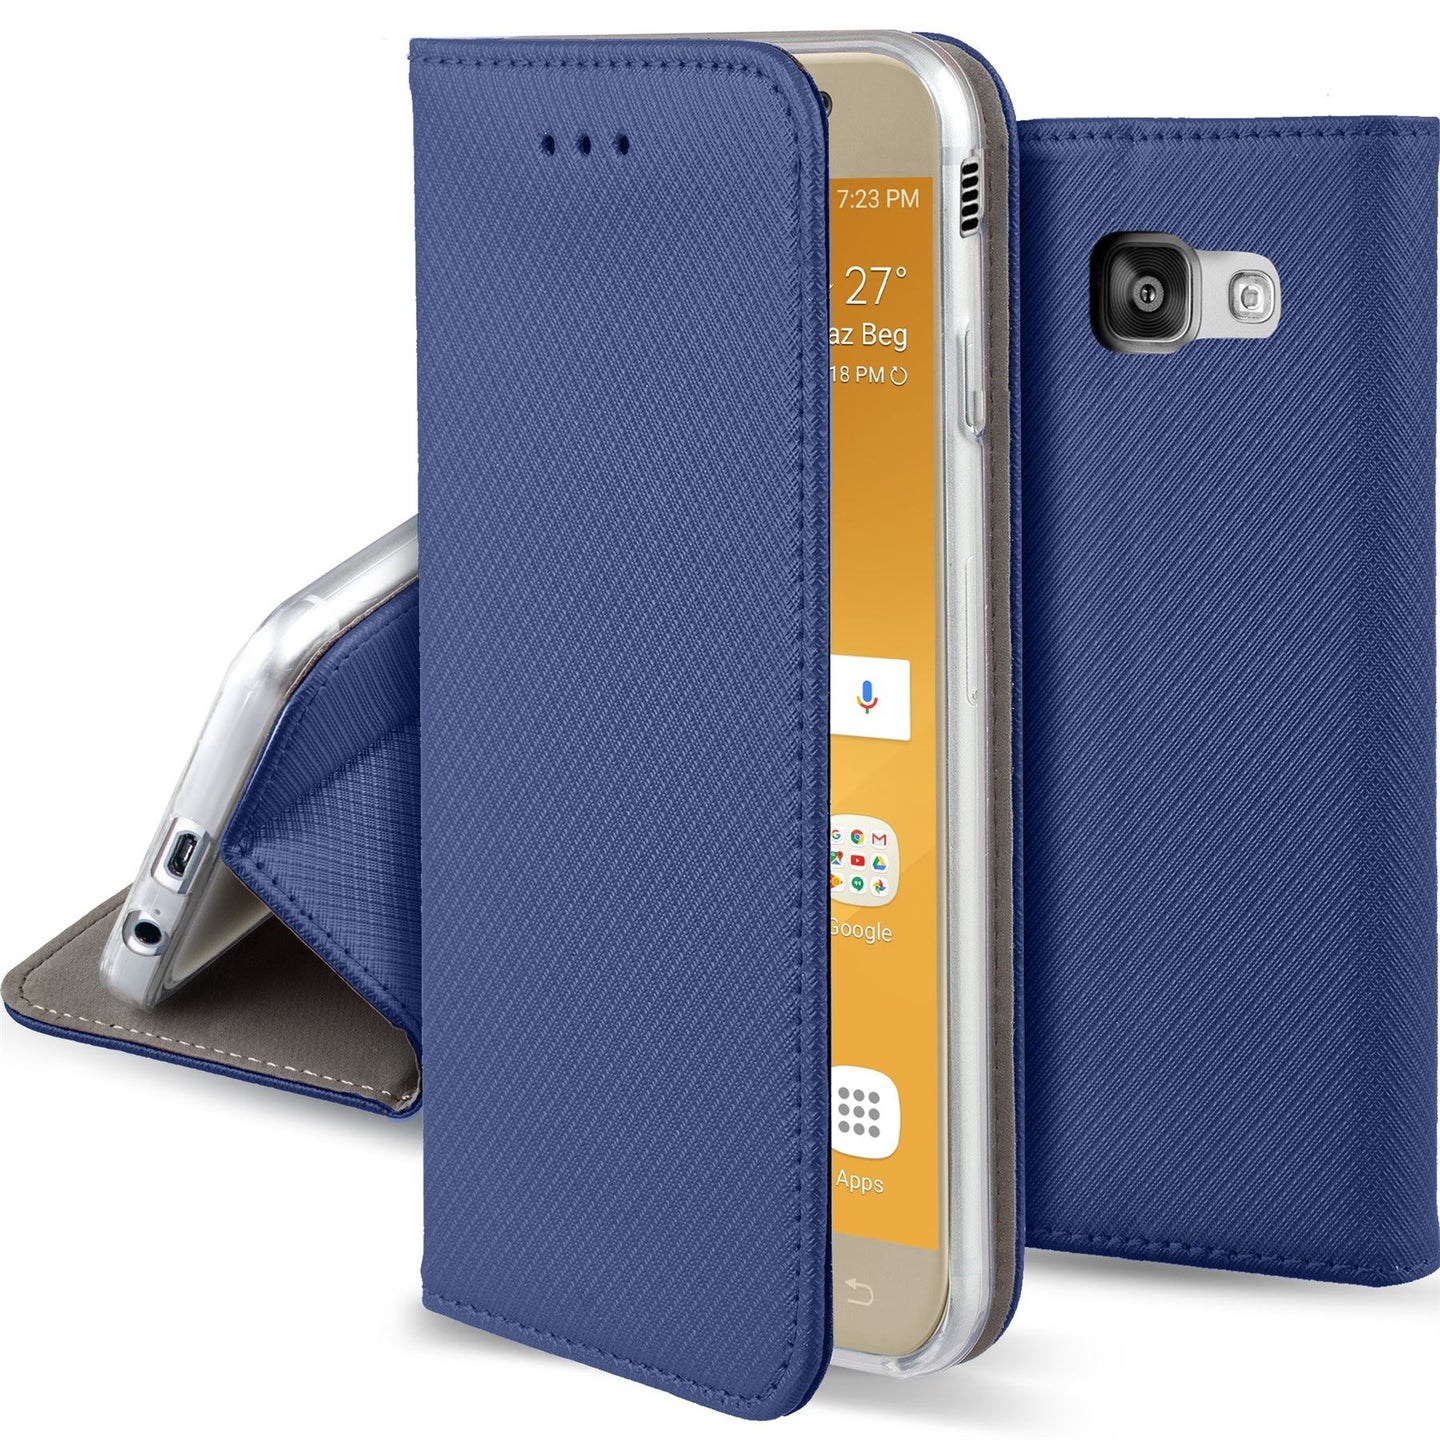 Moozy Case Flip Cover for Samsung A5 2017, Dark Blue - Smart Magnetic Flip Case with Card Holder and Stand